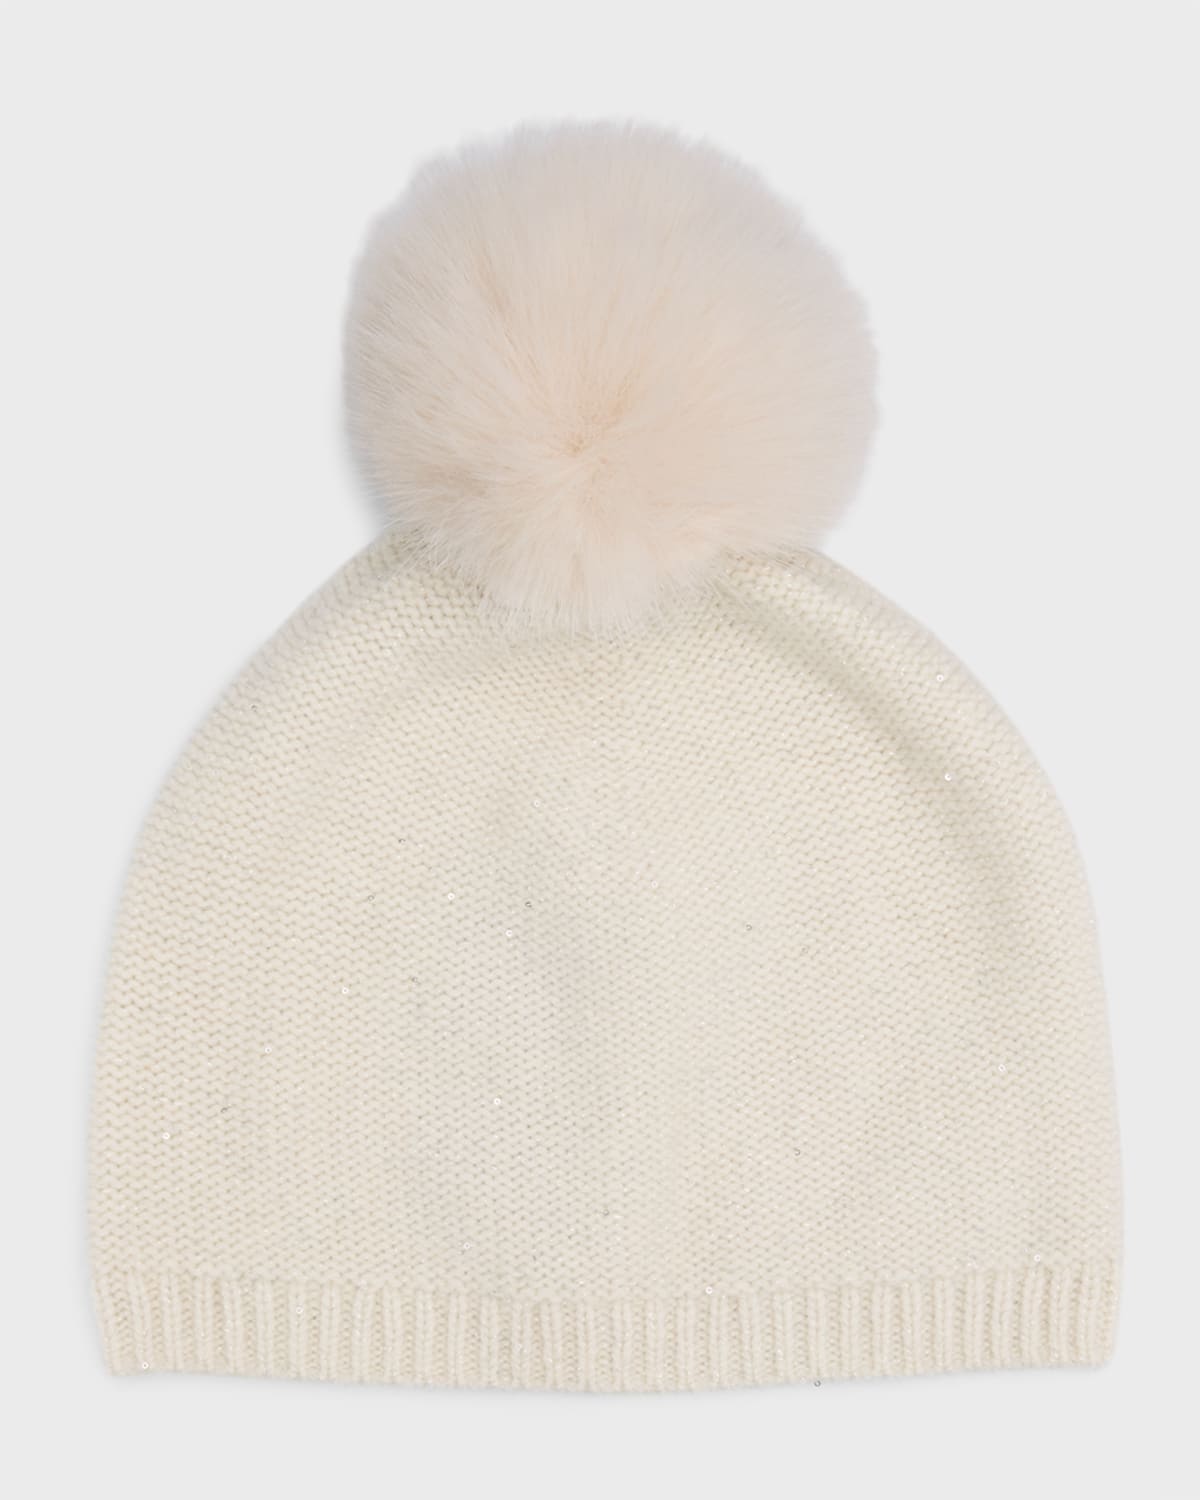 Cashmere Sequin Beanie With Faux Pom